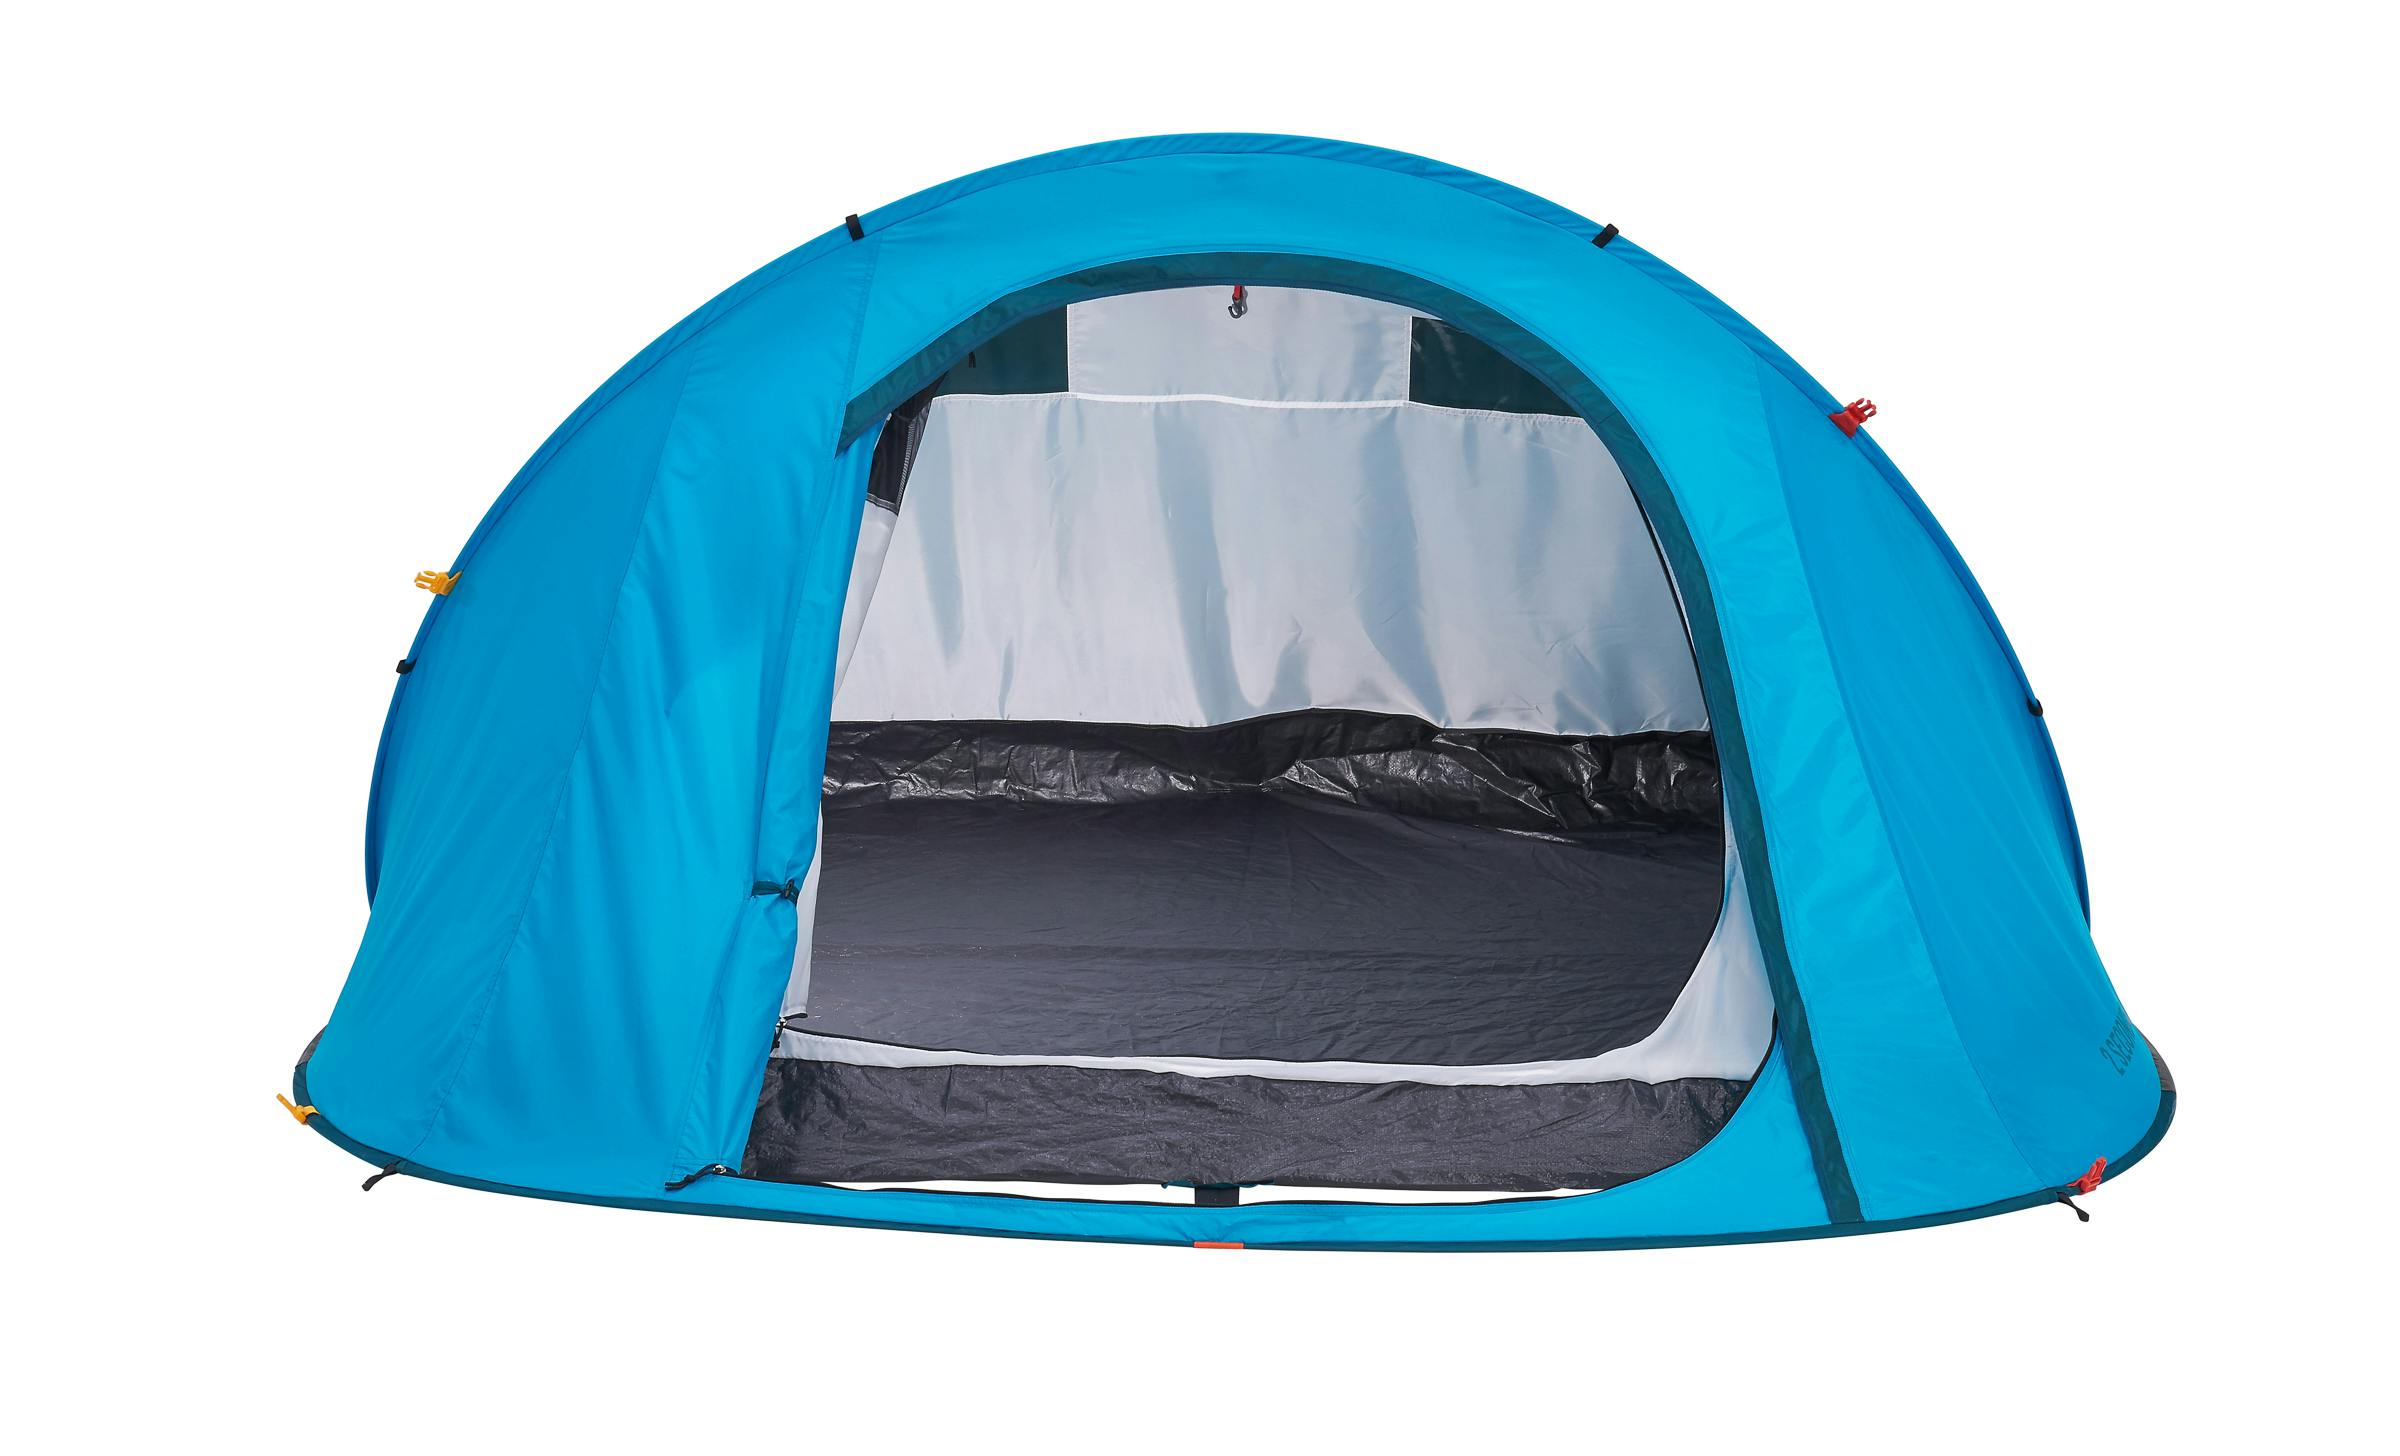 Tientallen tiran Whitney Decathlon 2 Seconds 3 Person Tent | Curated.com